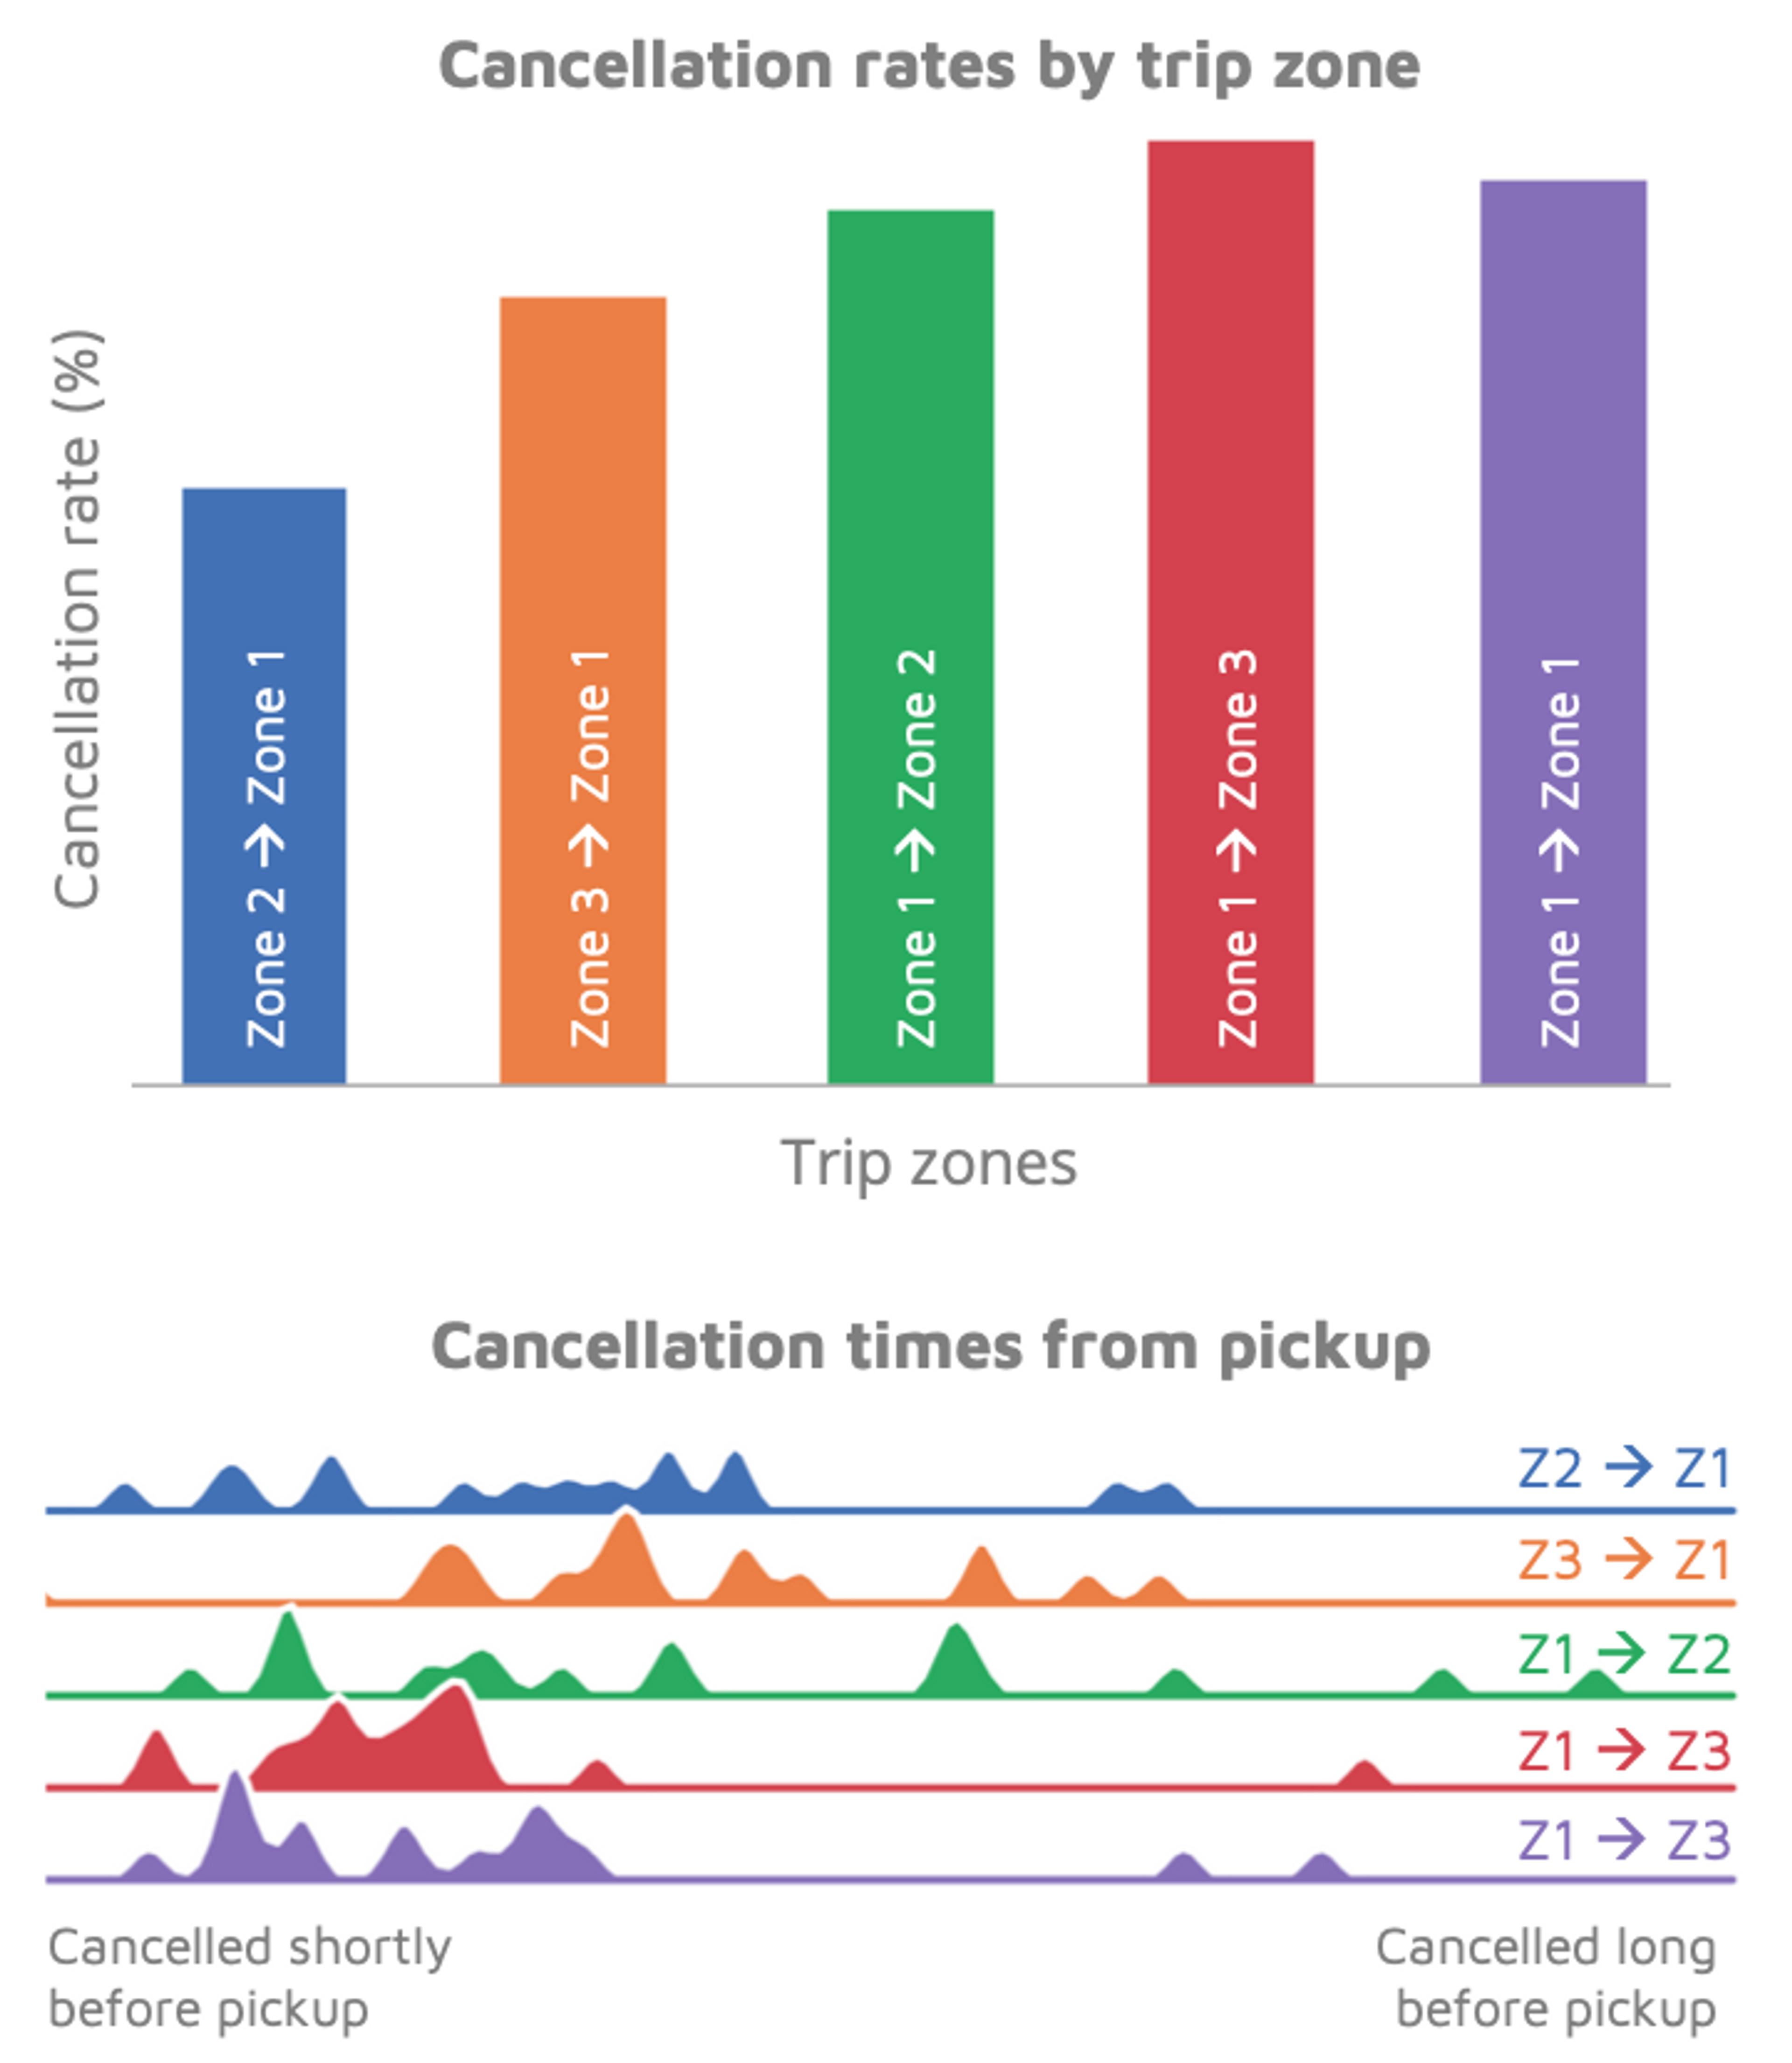 Cancelation rates by trip zone and cancellation times from pickup